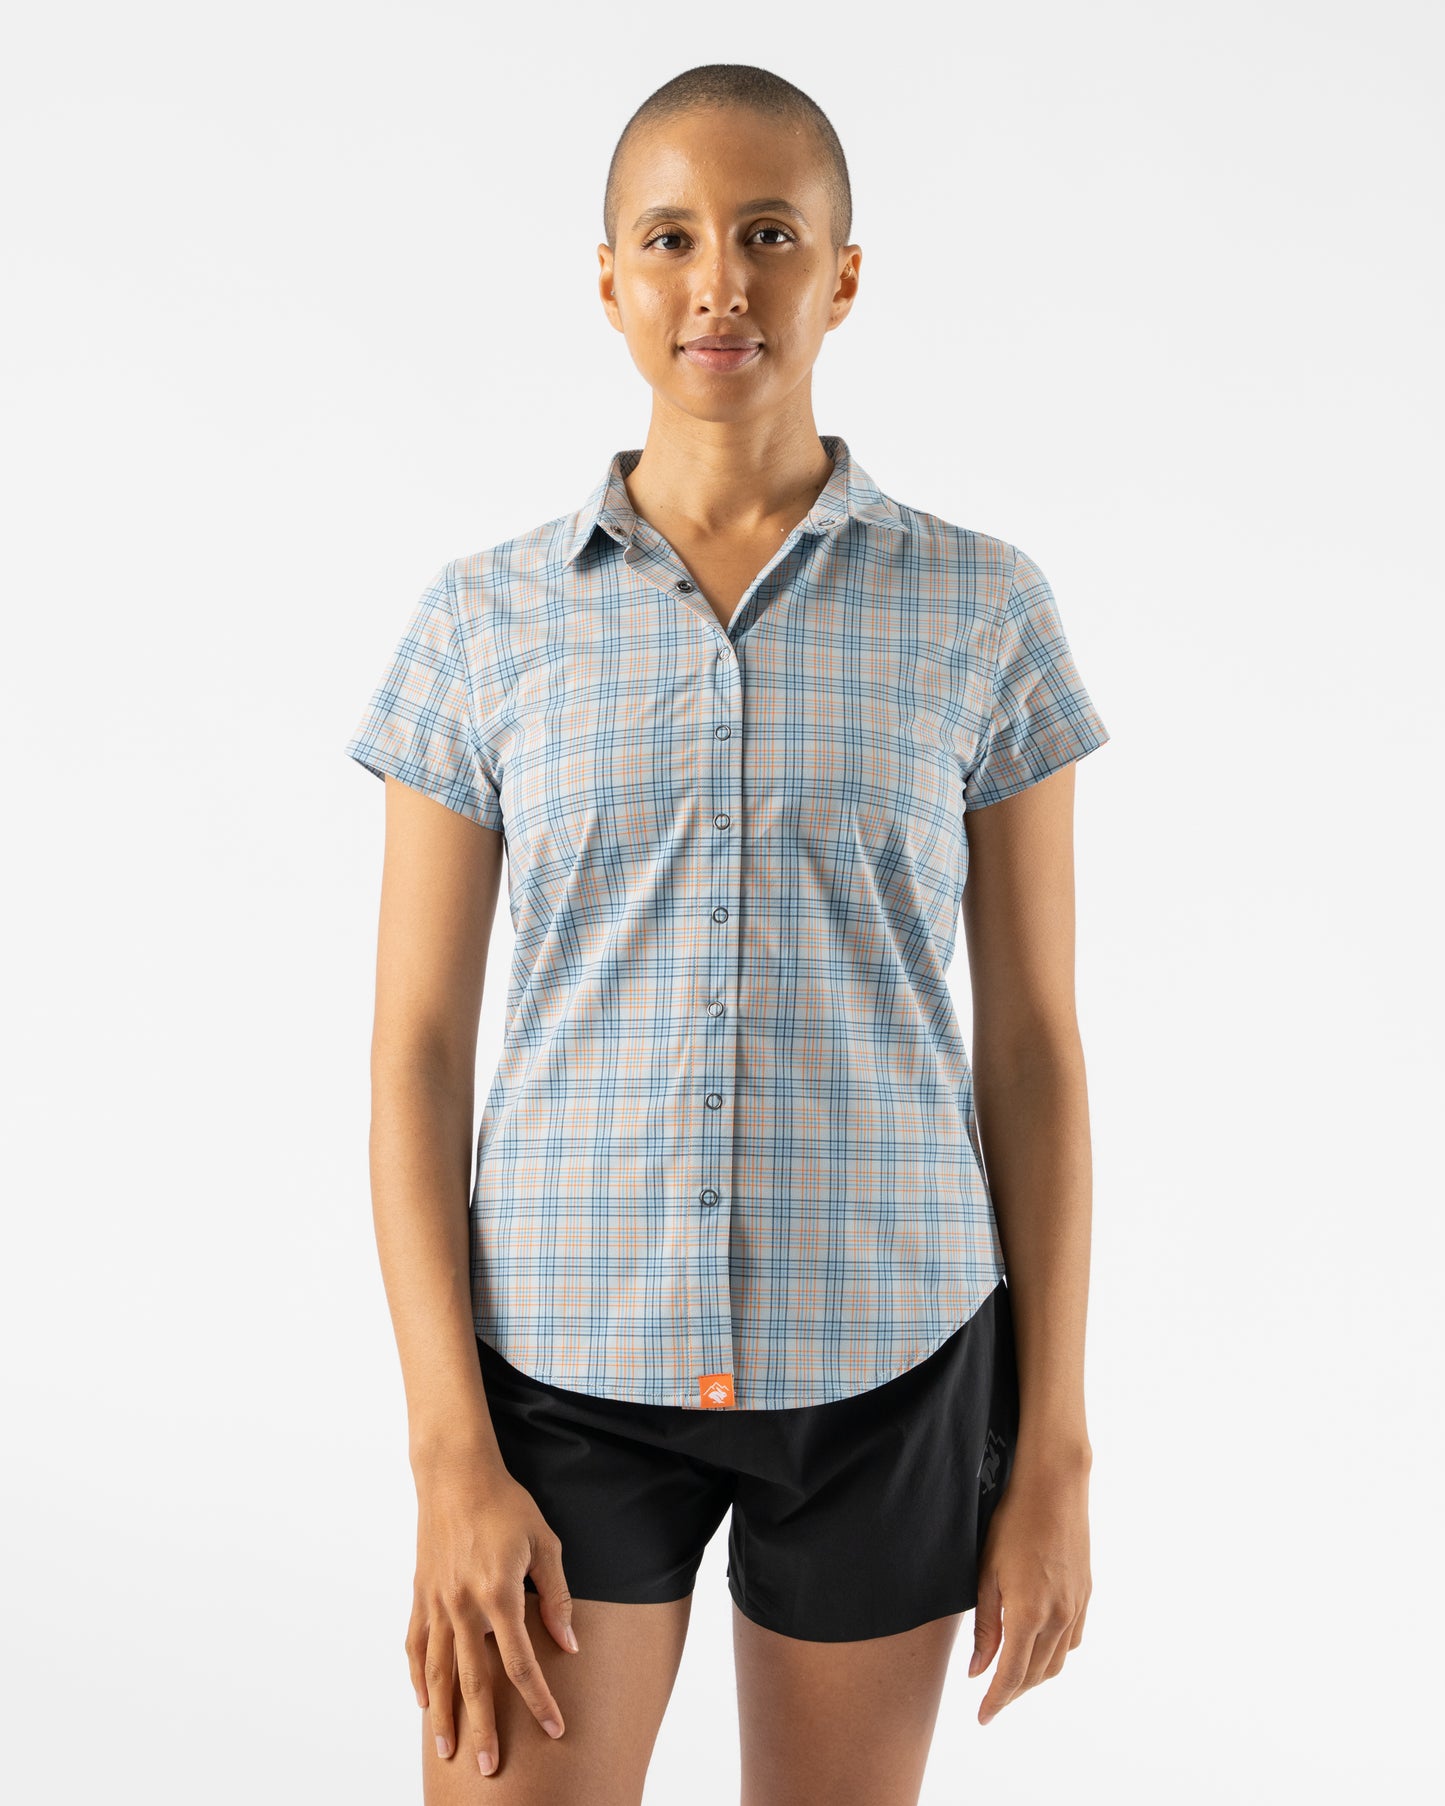 rabbit - High Country SS - All Aboard Plaid - Women's